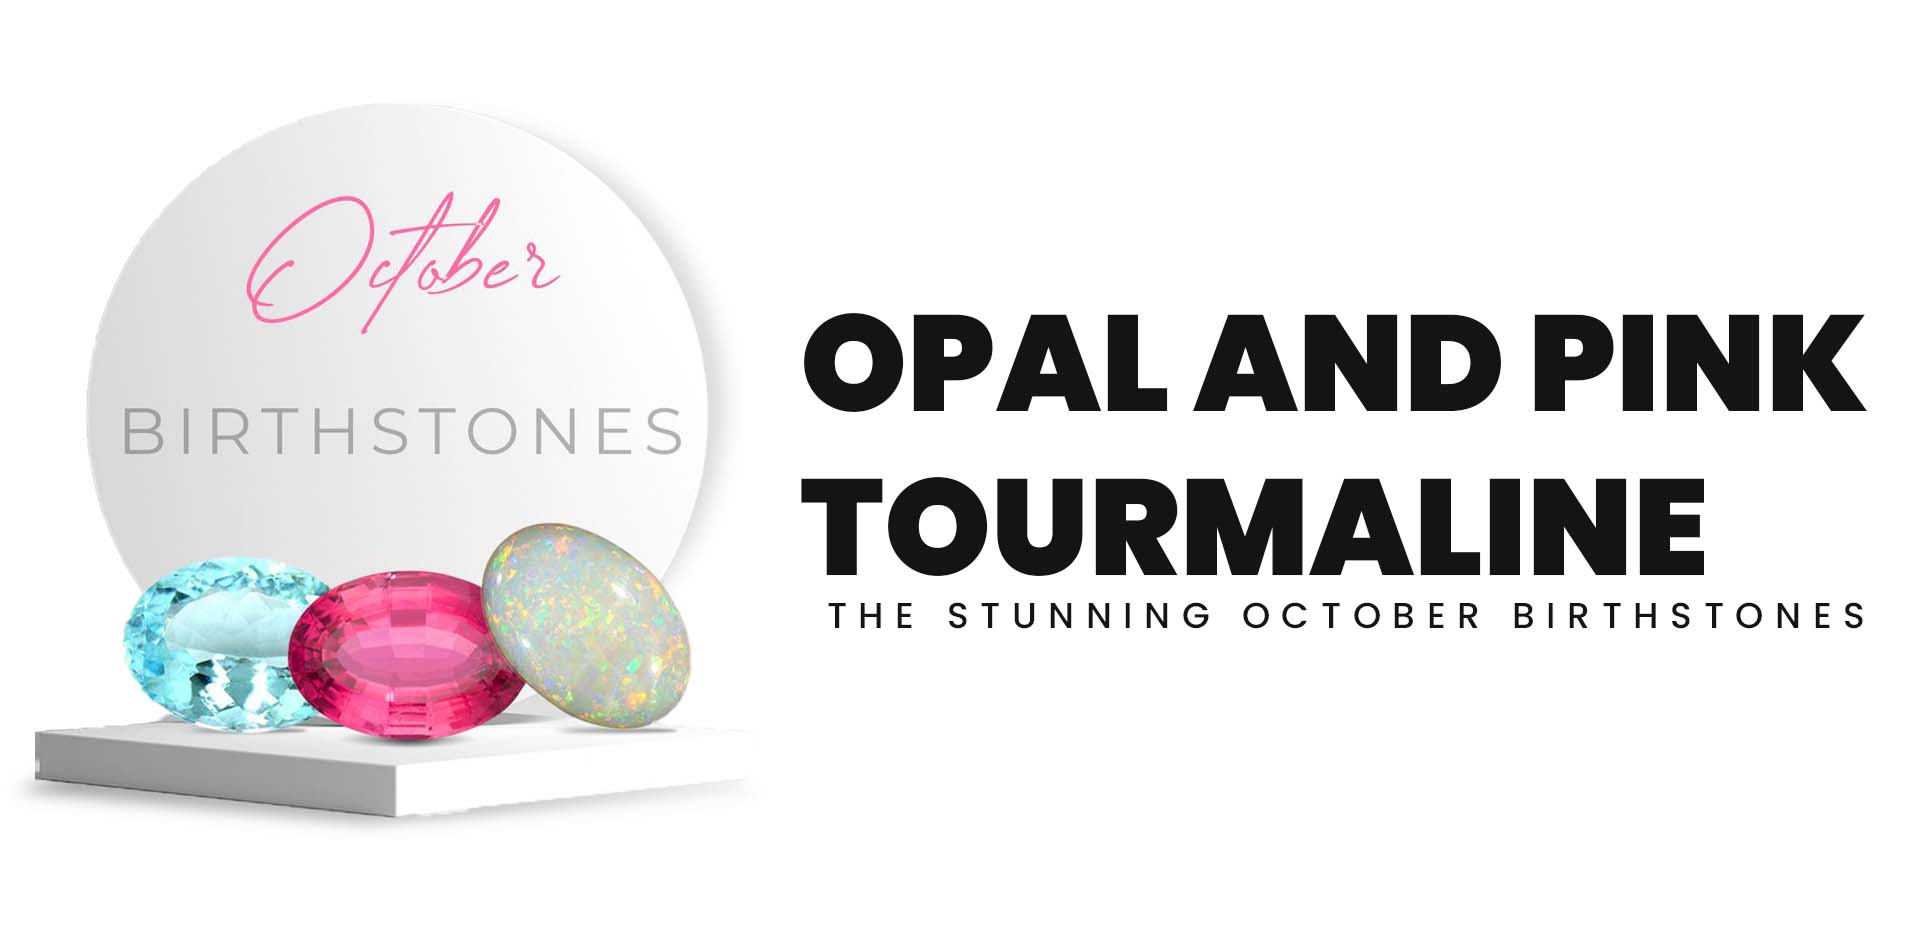 Opal and Pink Tourmaline: The Stunning October Birthstones